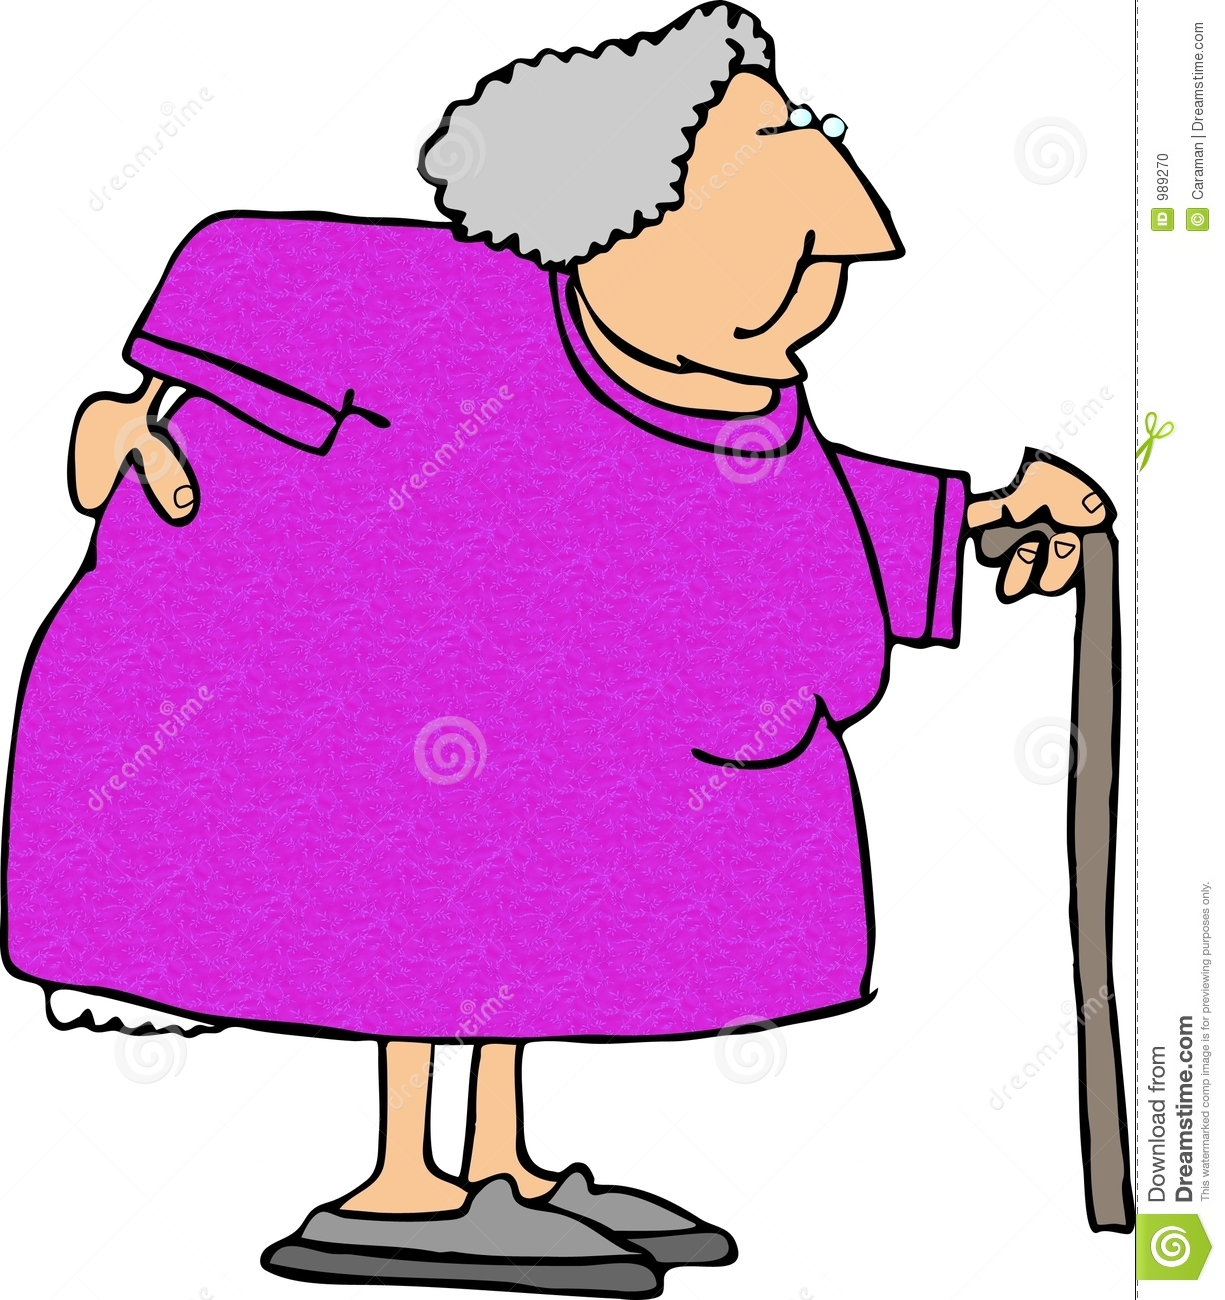 More Similar Stock Images Of   Old Woman With A Sore Back  